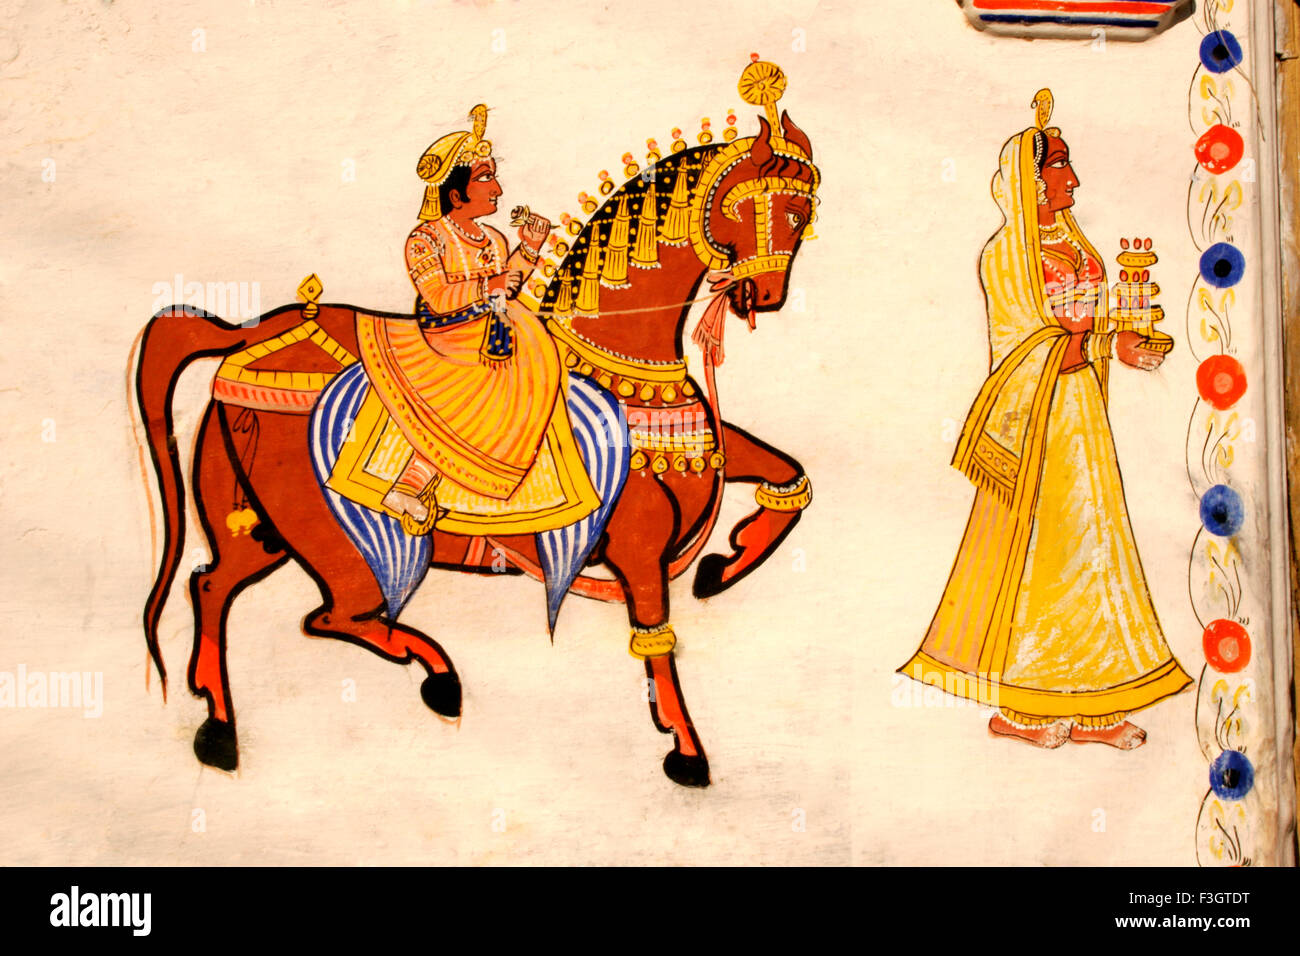 Wall painting depicting the King on horse coming to meet Queen ; Nathdwara ; Rajasthan ; India ; Asia Stock Photo